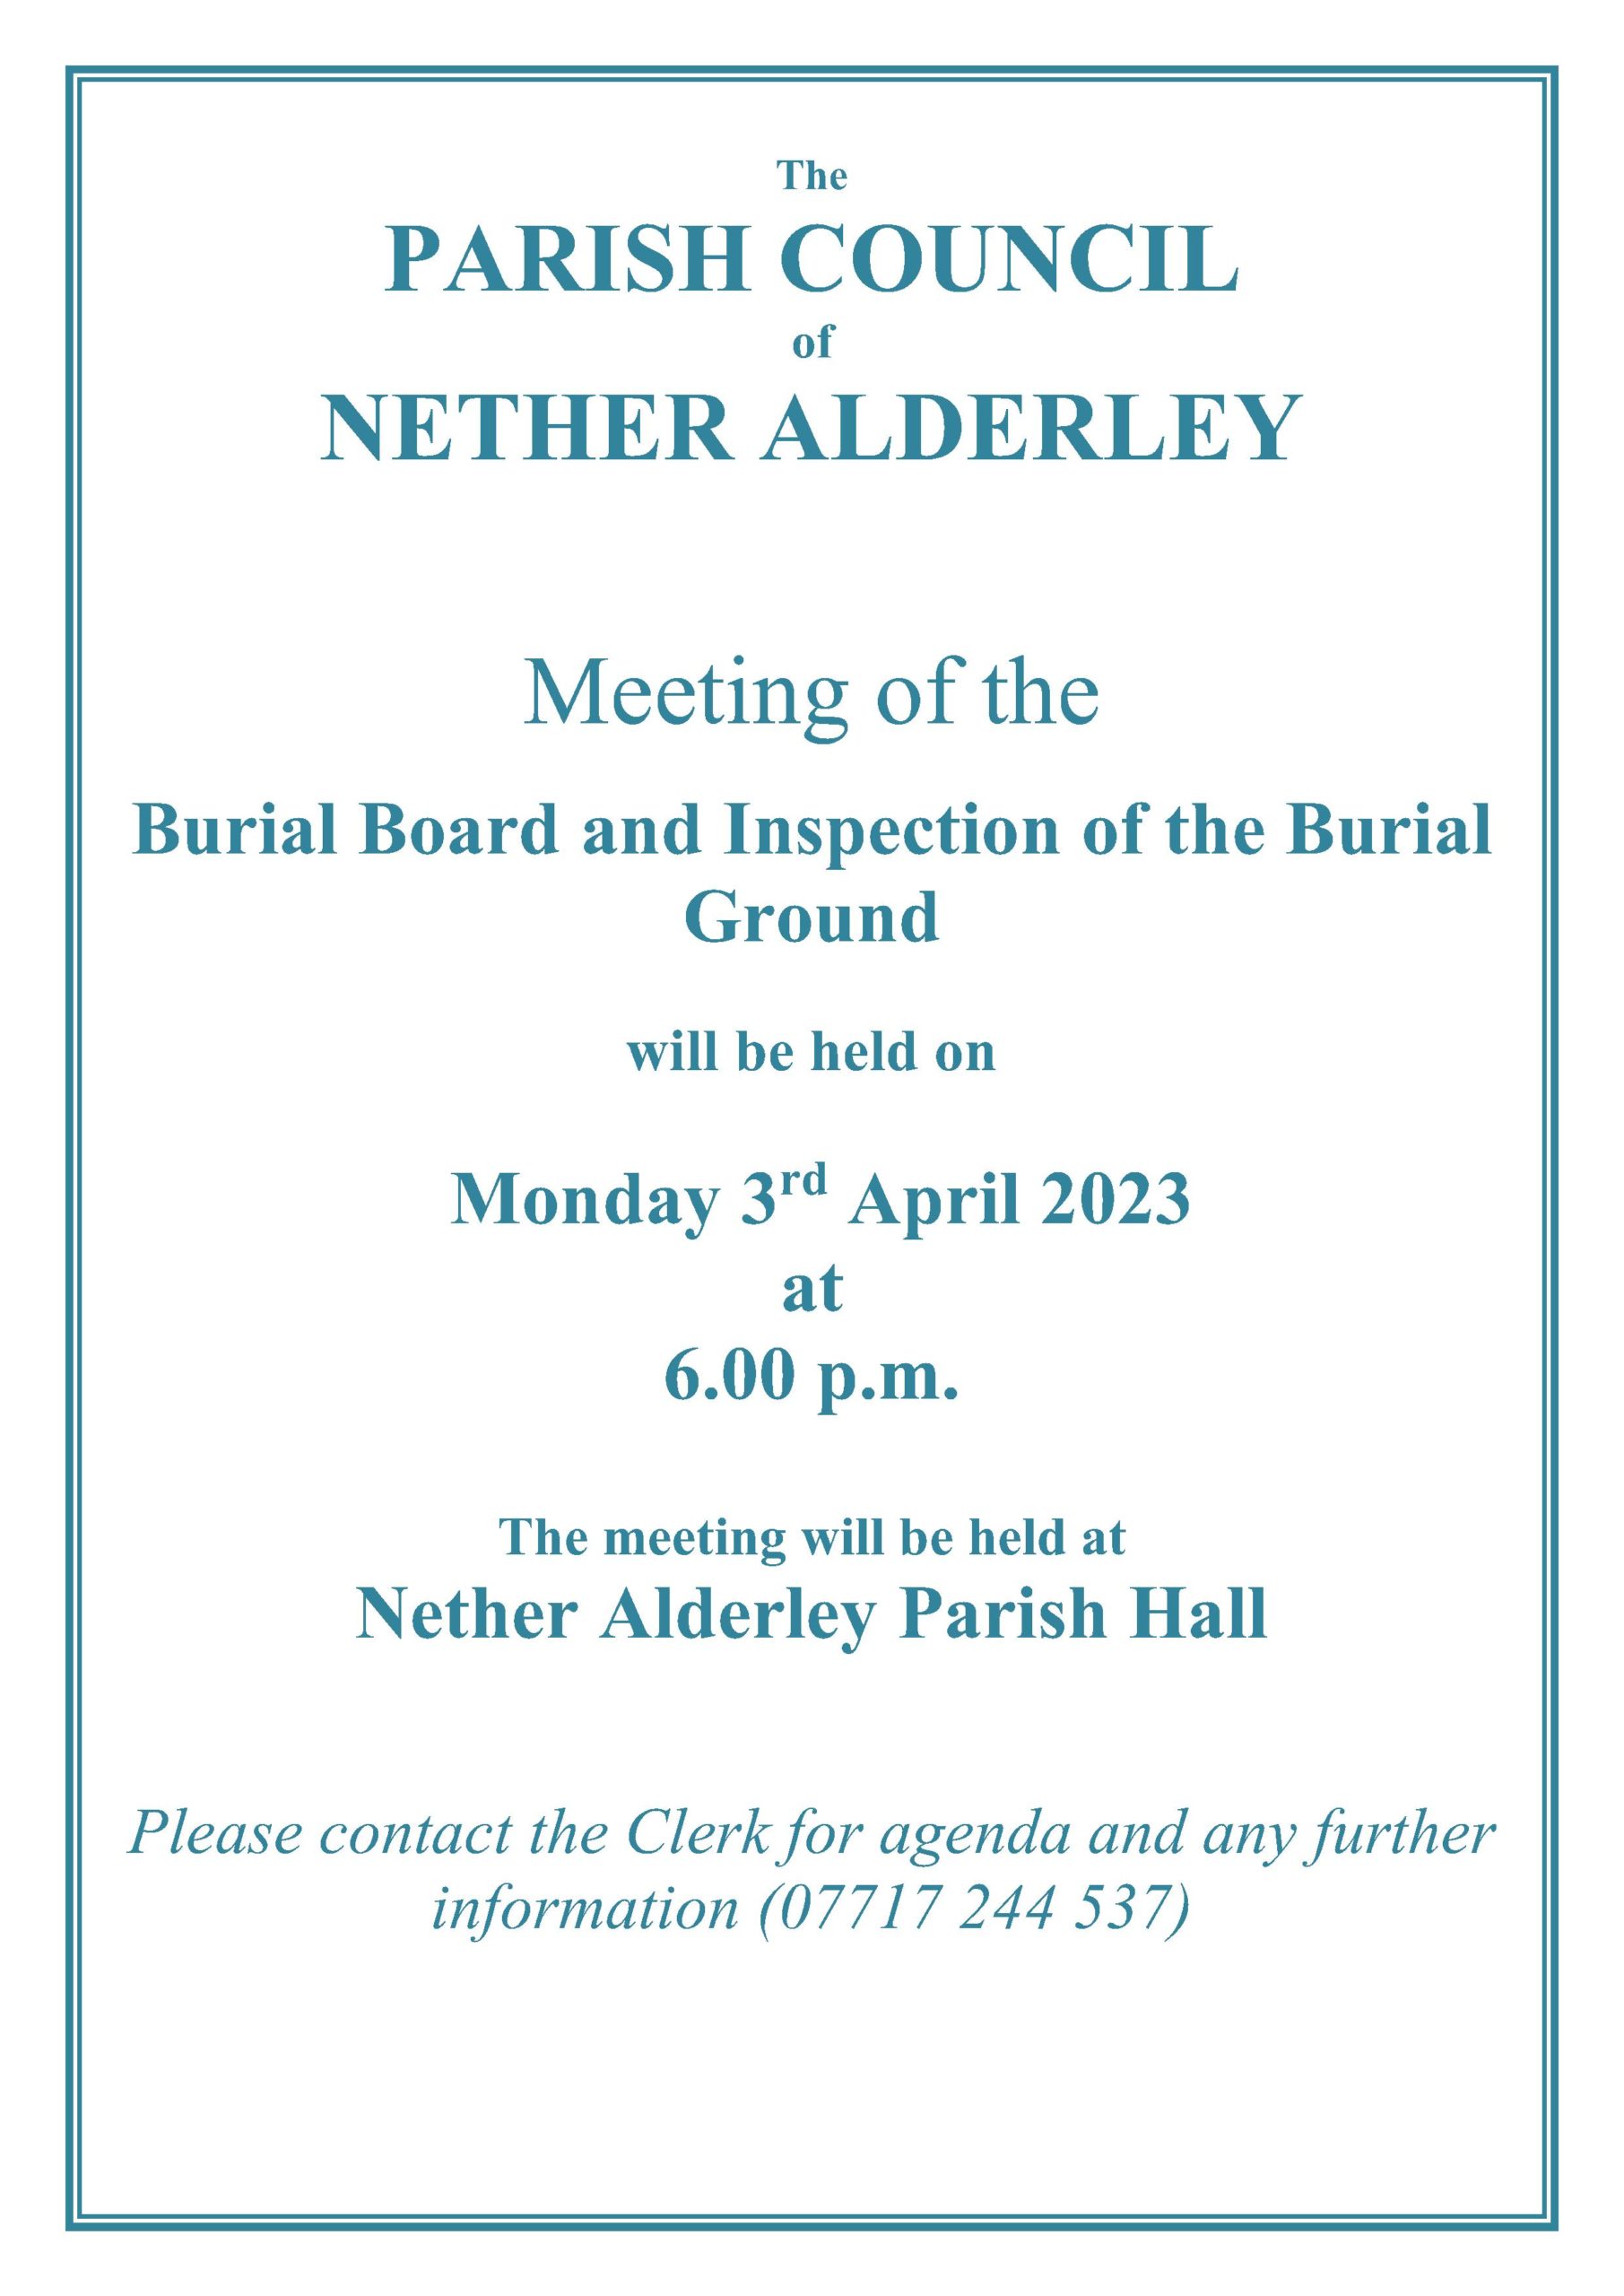 The Next Meeting of the Nether Alderley Parish Council Burial Board will be on Monday 3rd April 2023 at Nether Alderley Parish Hall 6pm